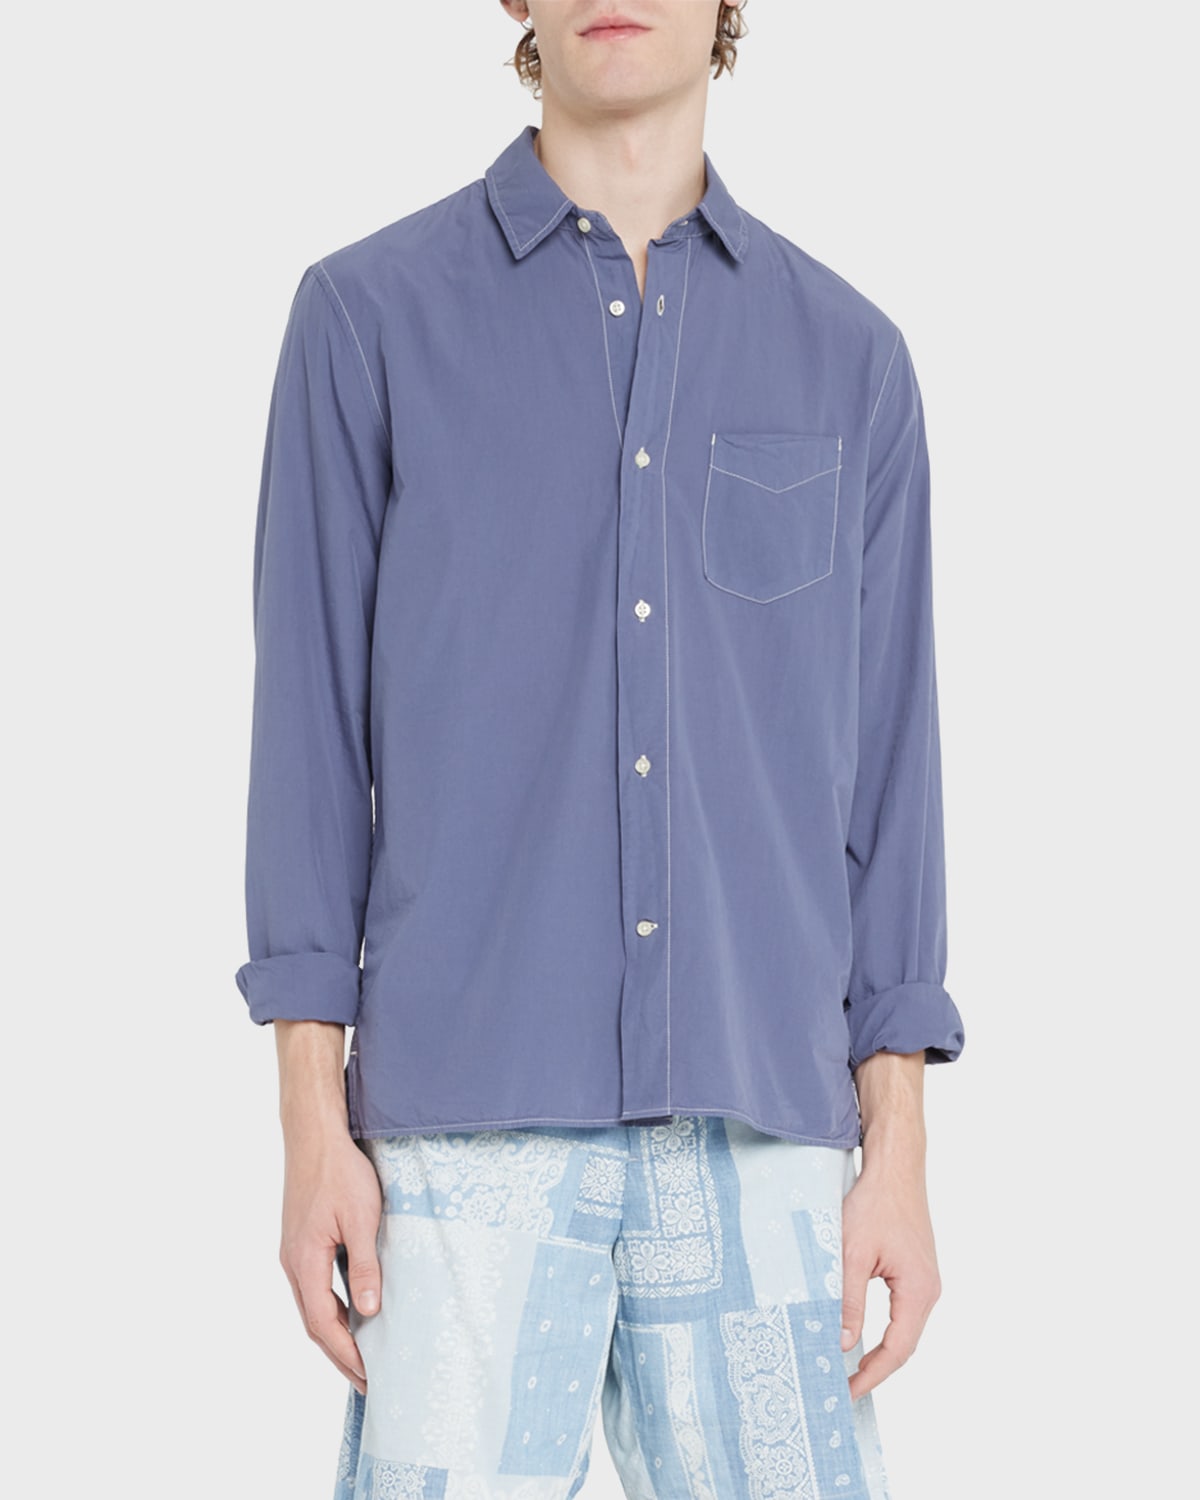 OFFICINE GENERALE MEN'S EMORY SPORT SHIRT WITH CONTRAST STITCHING